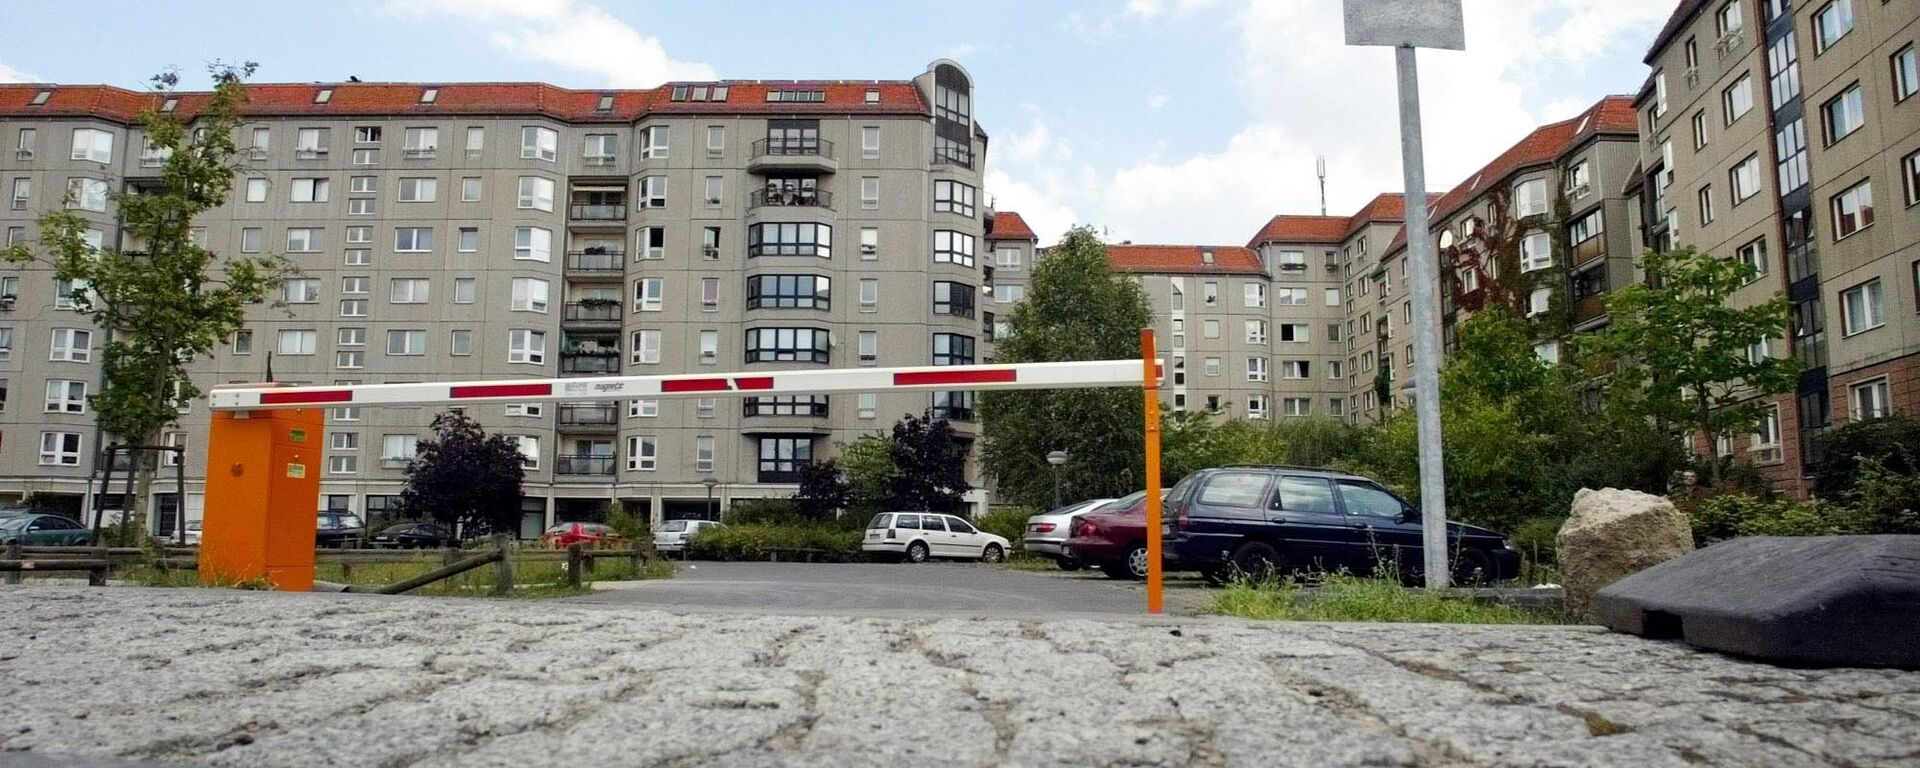 A parking lot and housing area in the German capital Berlin is seen on Tuesday, Sept. 14, 2004. Nothing on this parking area in the city's center reminds a viewer of former German Nazi-leader Adolf Hitler's bunker which was located here and the bunker's exit, where Hitler and his wife Eva were burned by aides after committing suicide. After WW II, East Germany built up a housing area on the site of the bunker. - Sputnik International, 1920, 22.10.2021